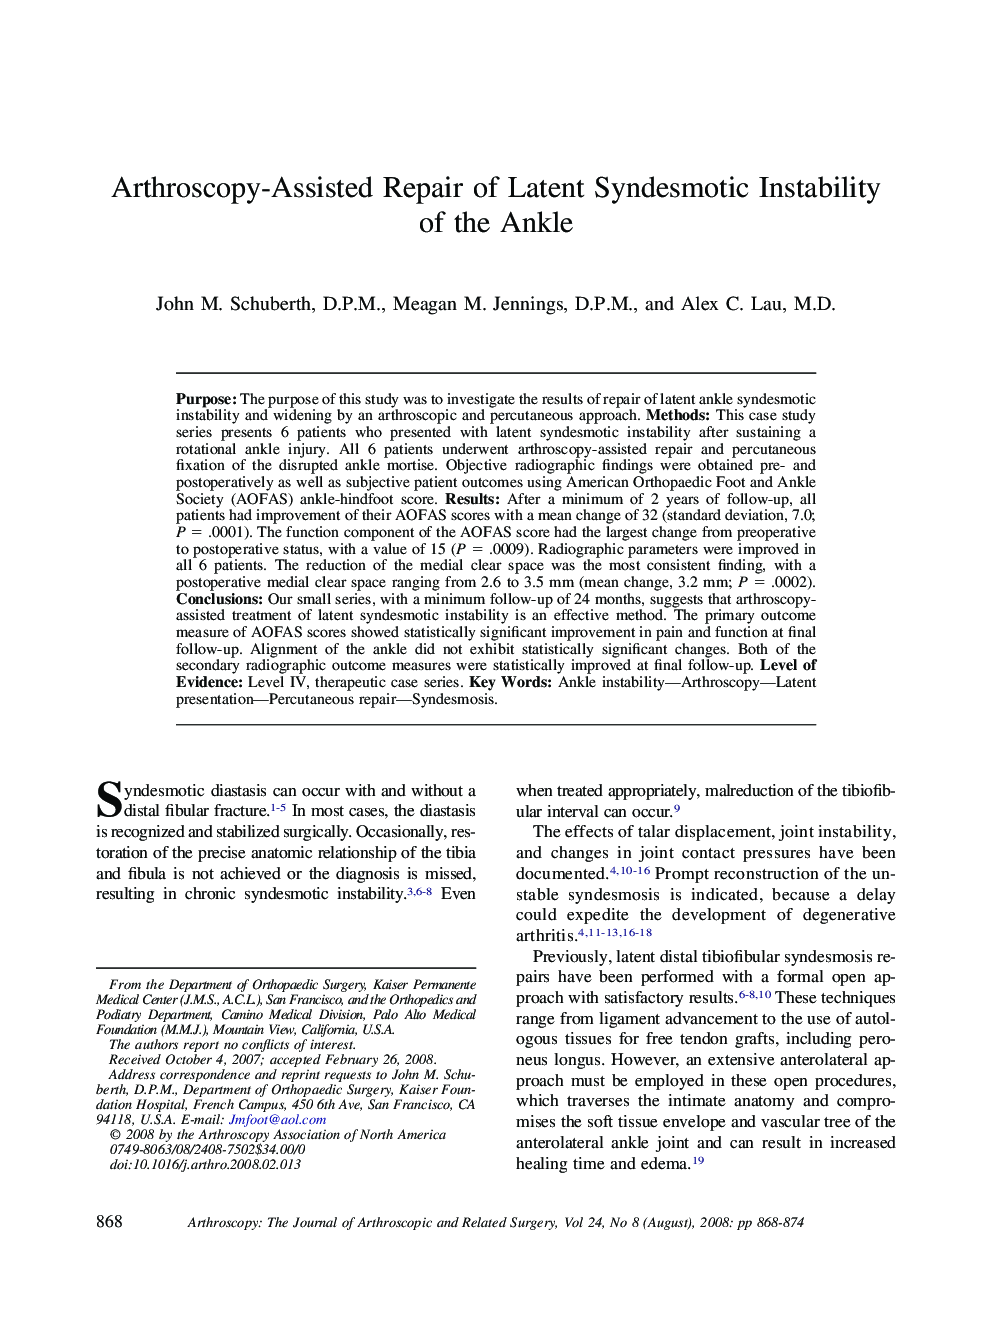 Arthroscopy-Assisted Repair of Latent Syndesmotic Instability of the Ankle 